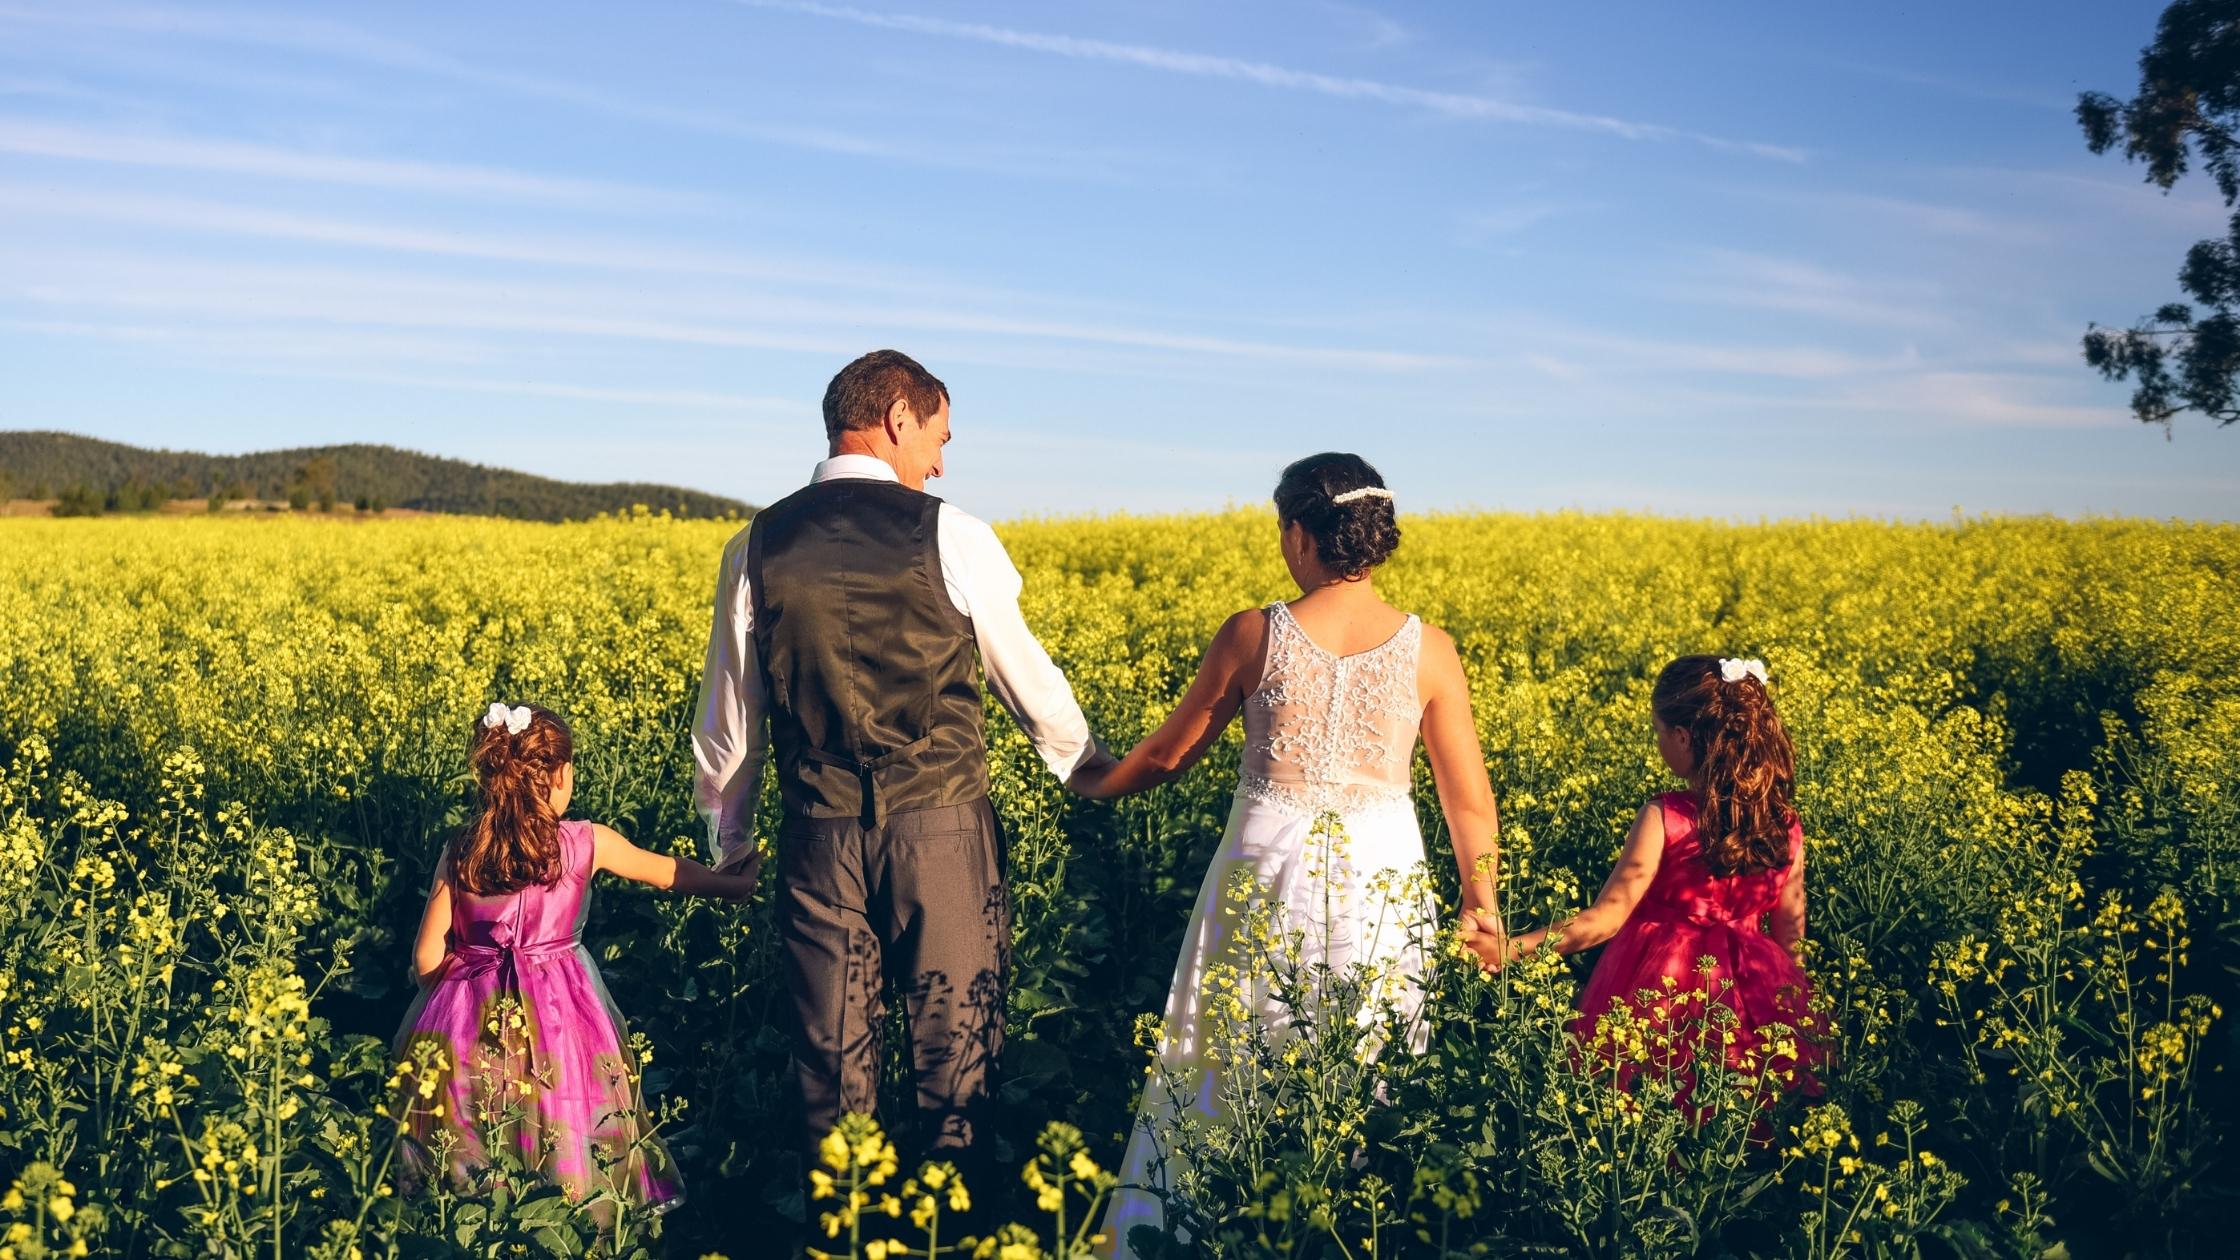 Family in the Canola Crop